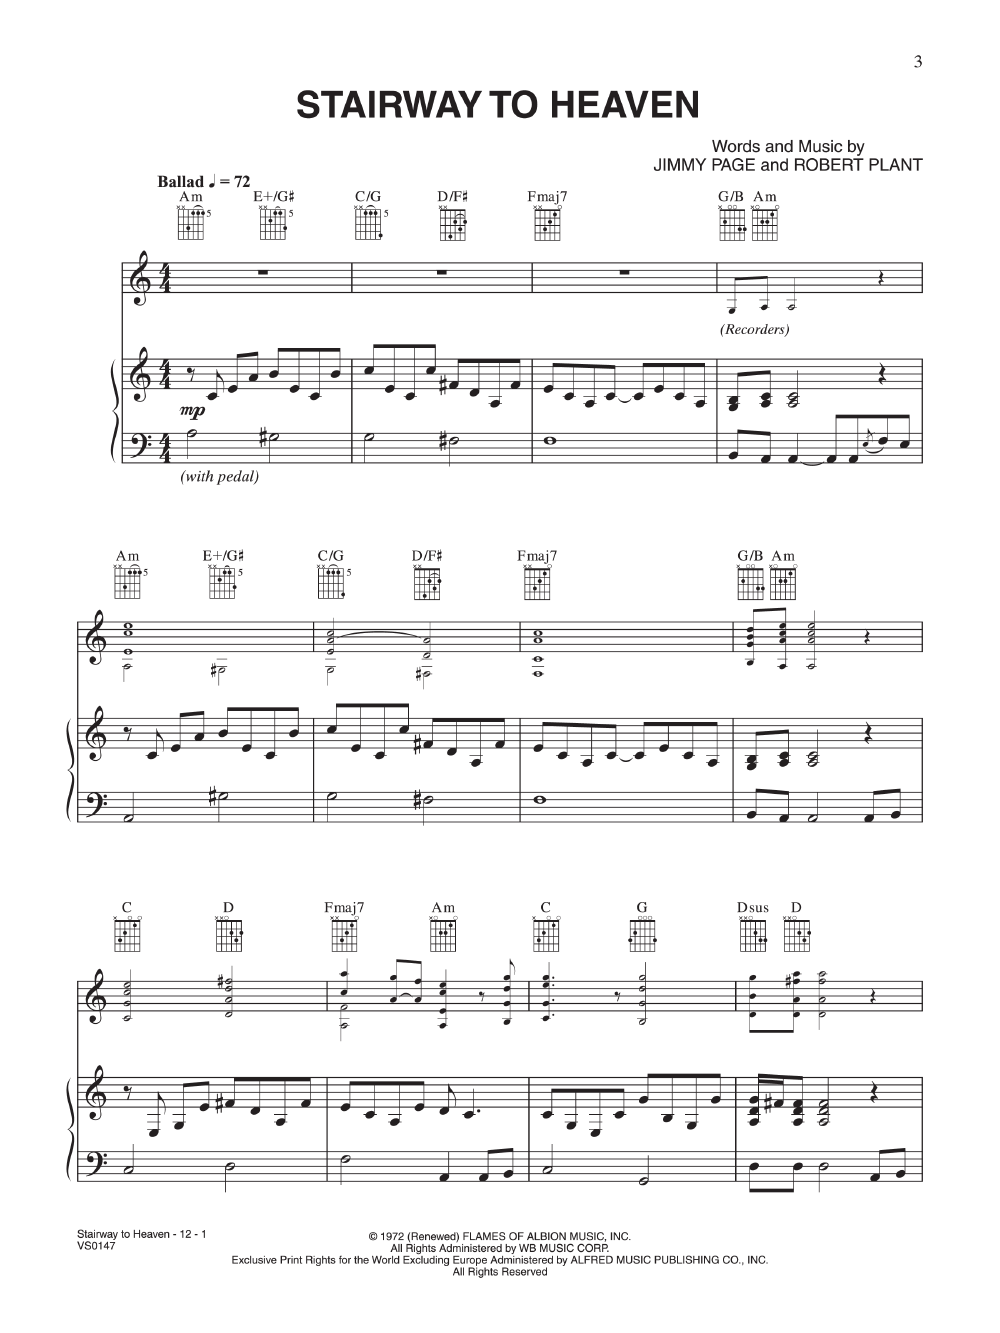 stairway to heaven live tab pdf to word